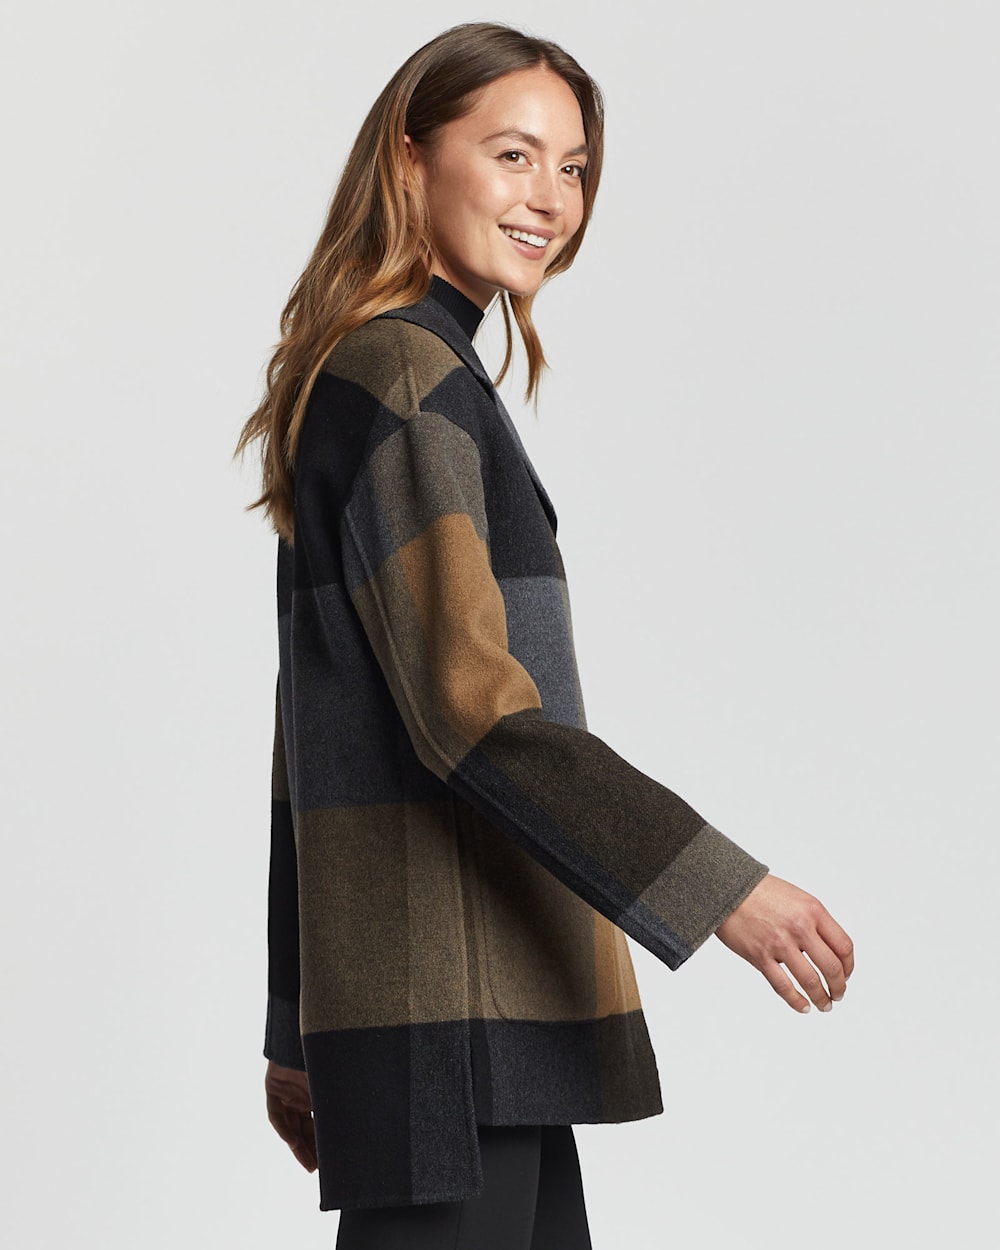 ALTERNATE VIEW OF WOMEN'S FLAGSTAFF WOOL TOPPER COAT IN CHARCOAL/CAMEL PLAID image number 2